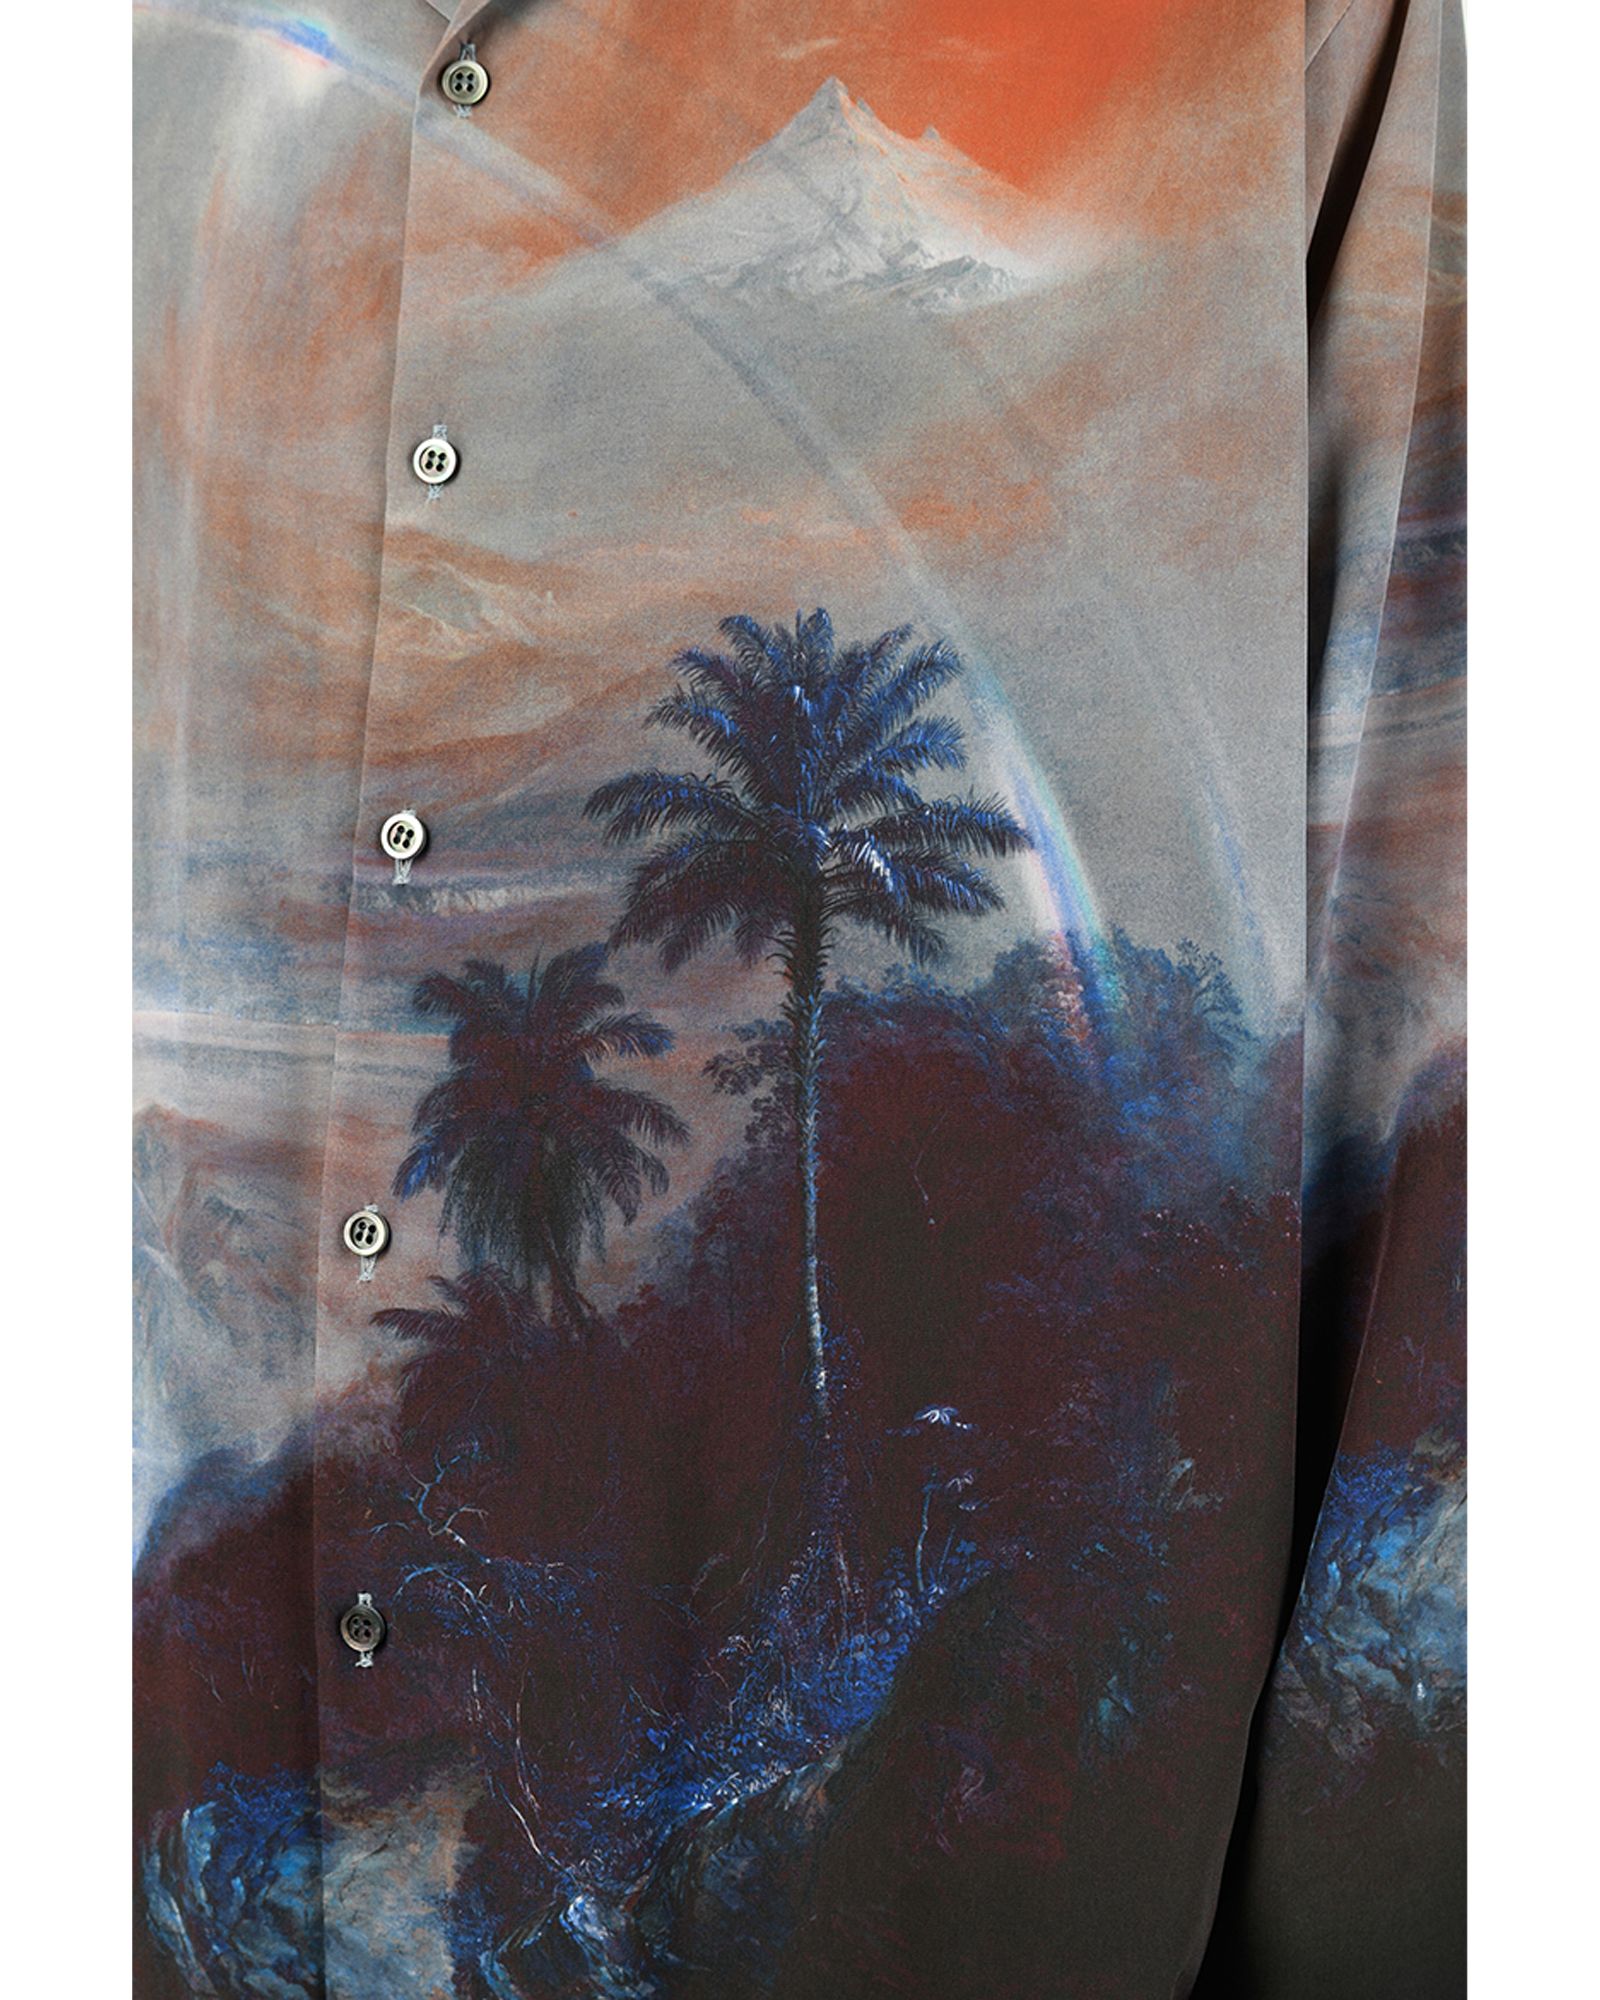 Men's Rayon Keep Palm and Carry On Print Sport Shirt